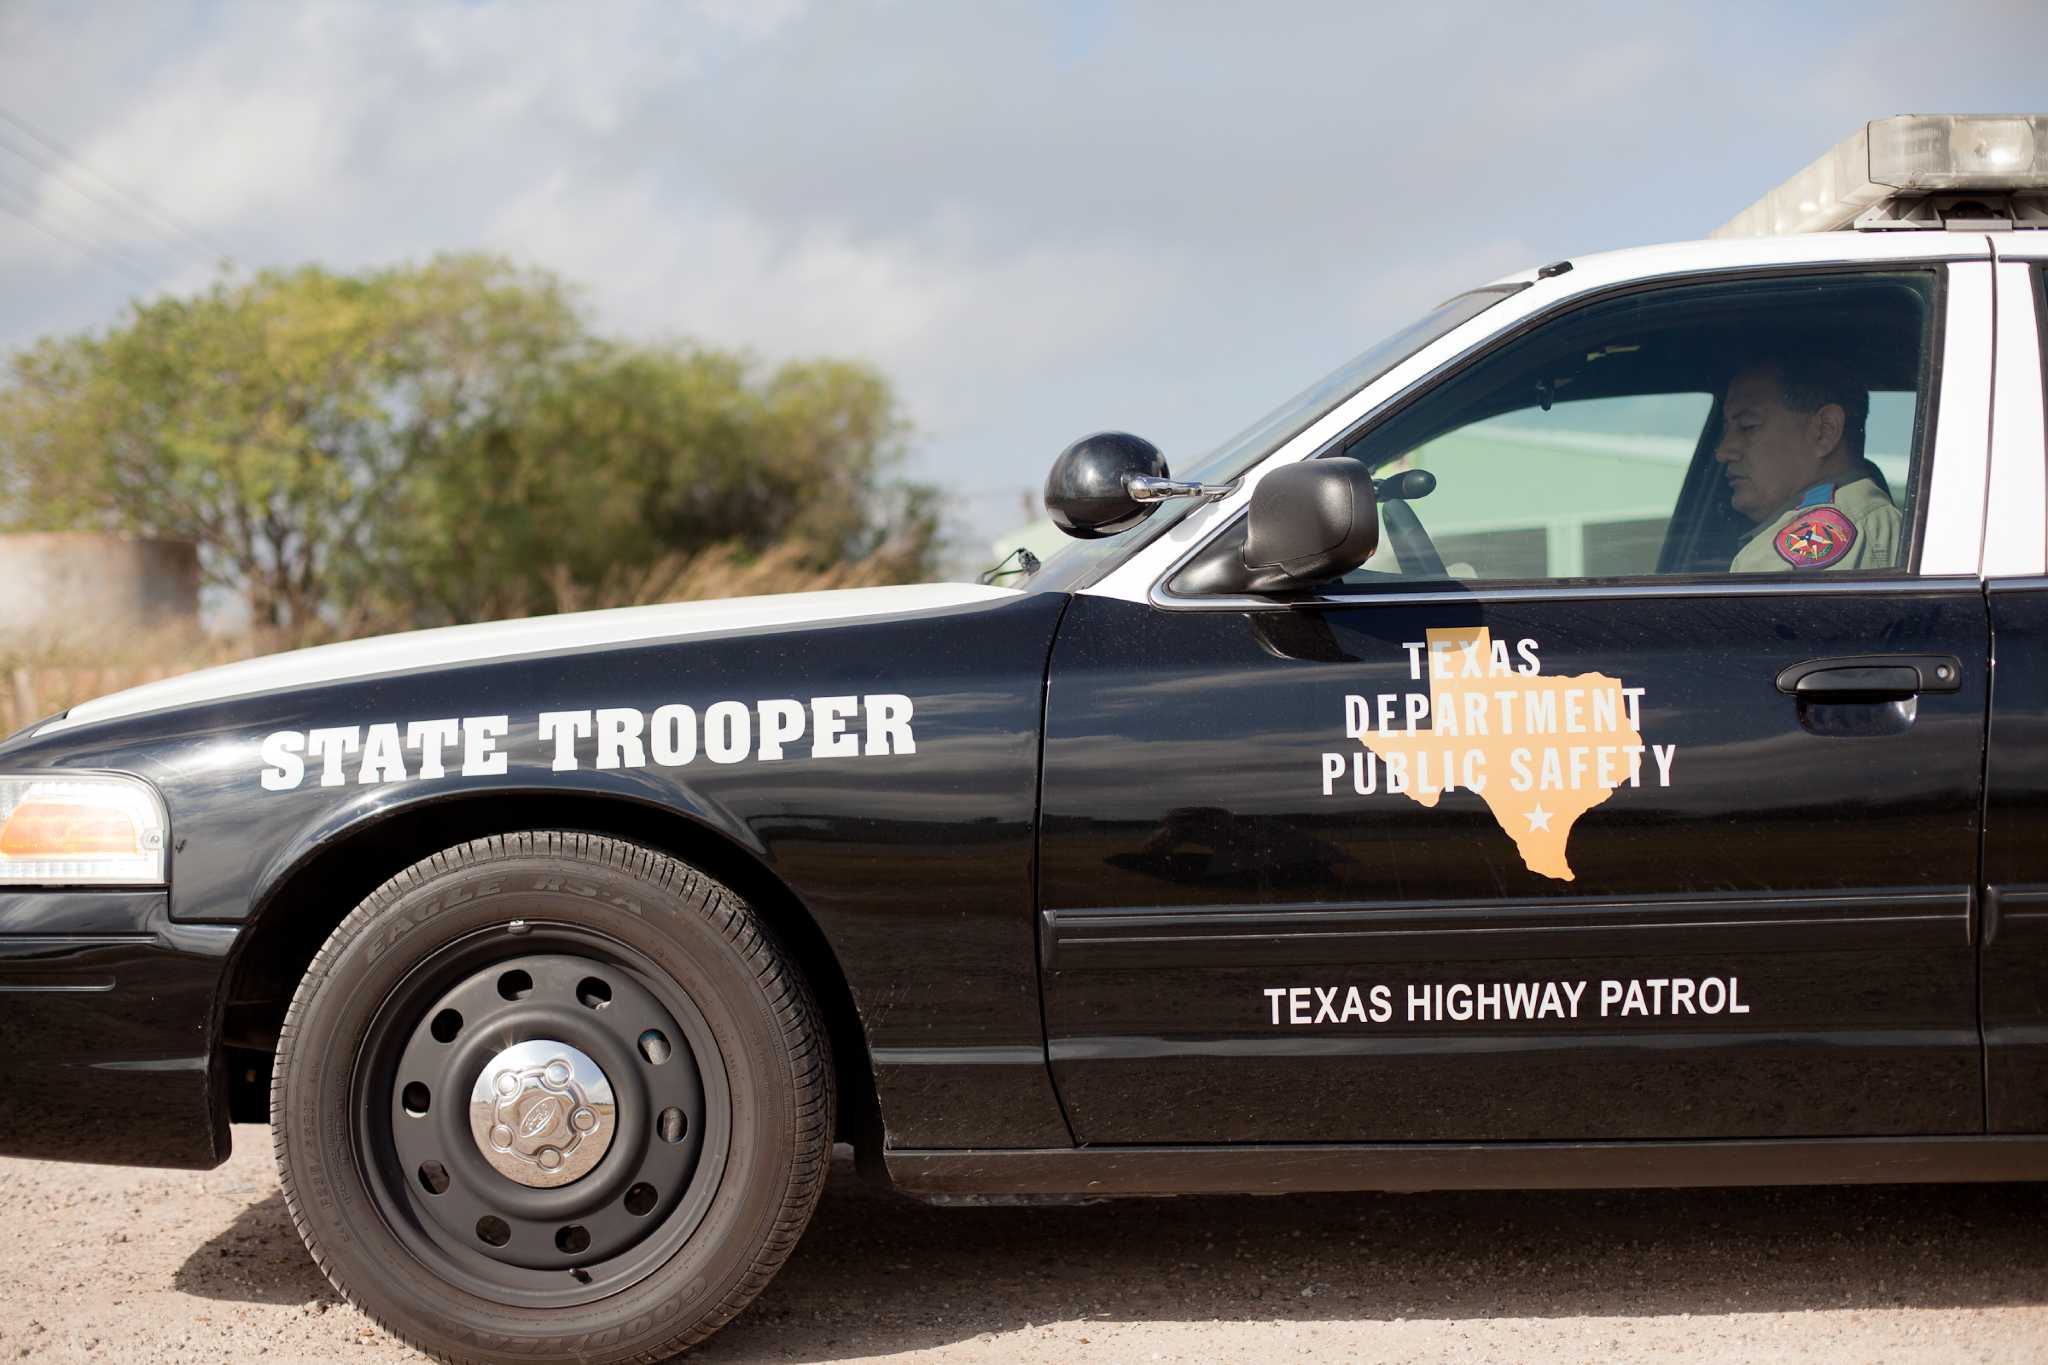 LPT For Texans: ALL LAW ENFORCEMENT VEHICLES IN TEXAS (besides detectives  and narc teams) ARE REQUIRED TO RUN ALL NUMBER PLATES. That includes ghost  graphics cop cars. So if you see an